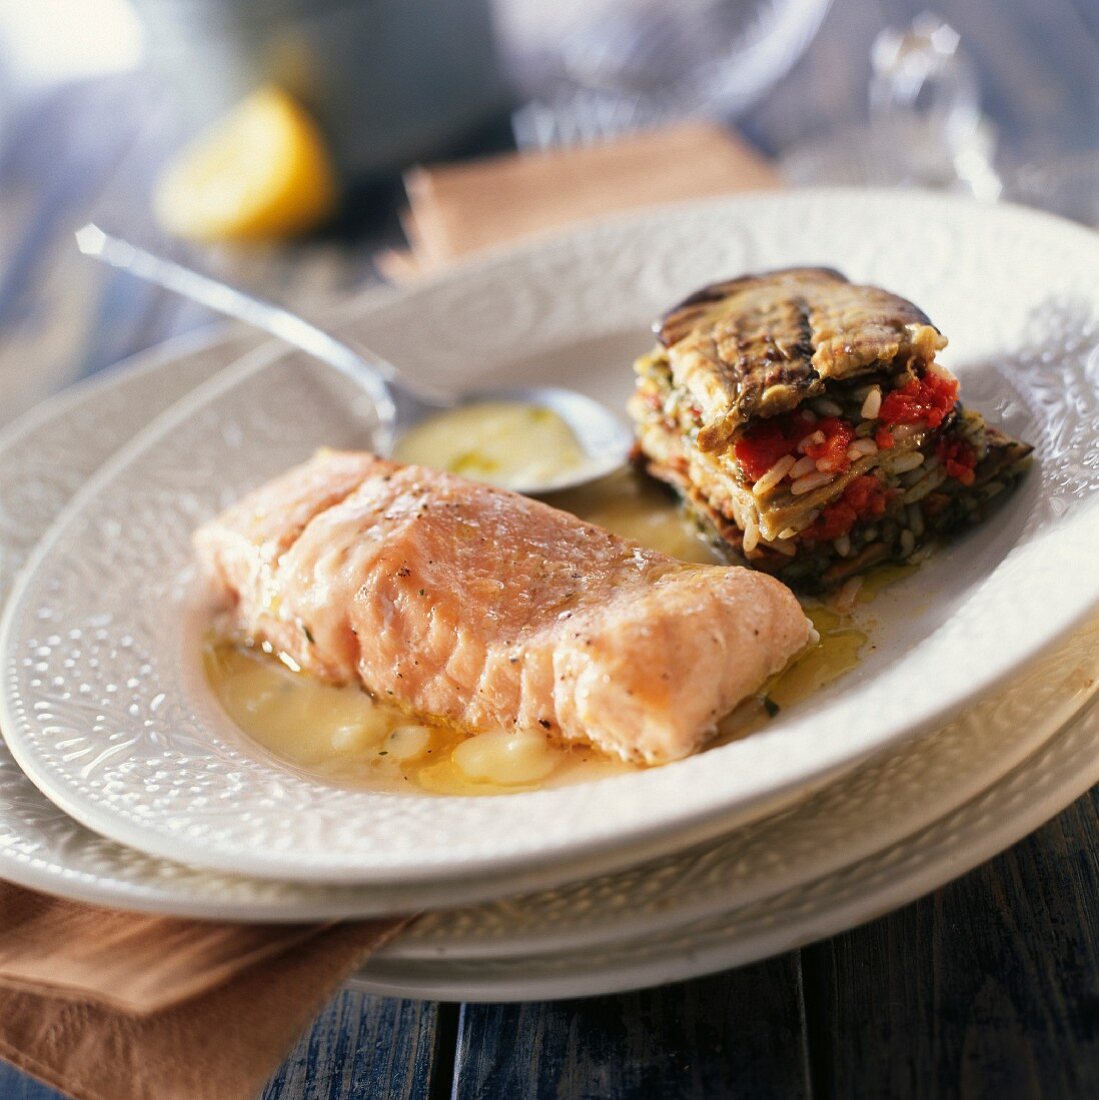 Roast salmon fillet with lemon sauce and eggplant mille-feuille